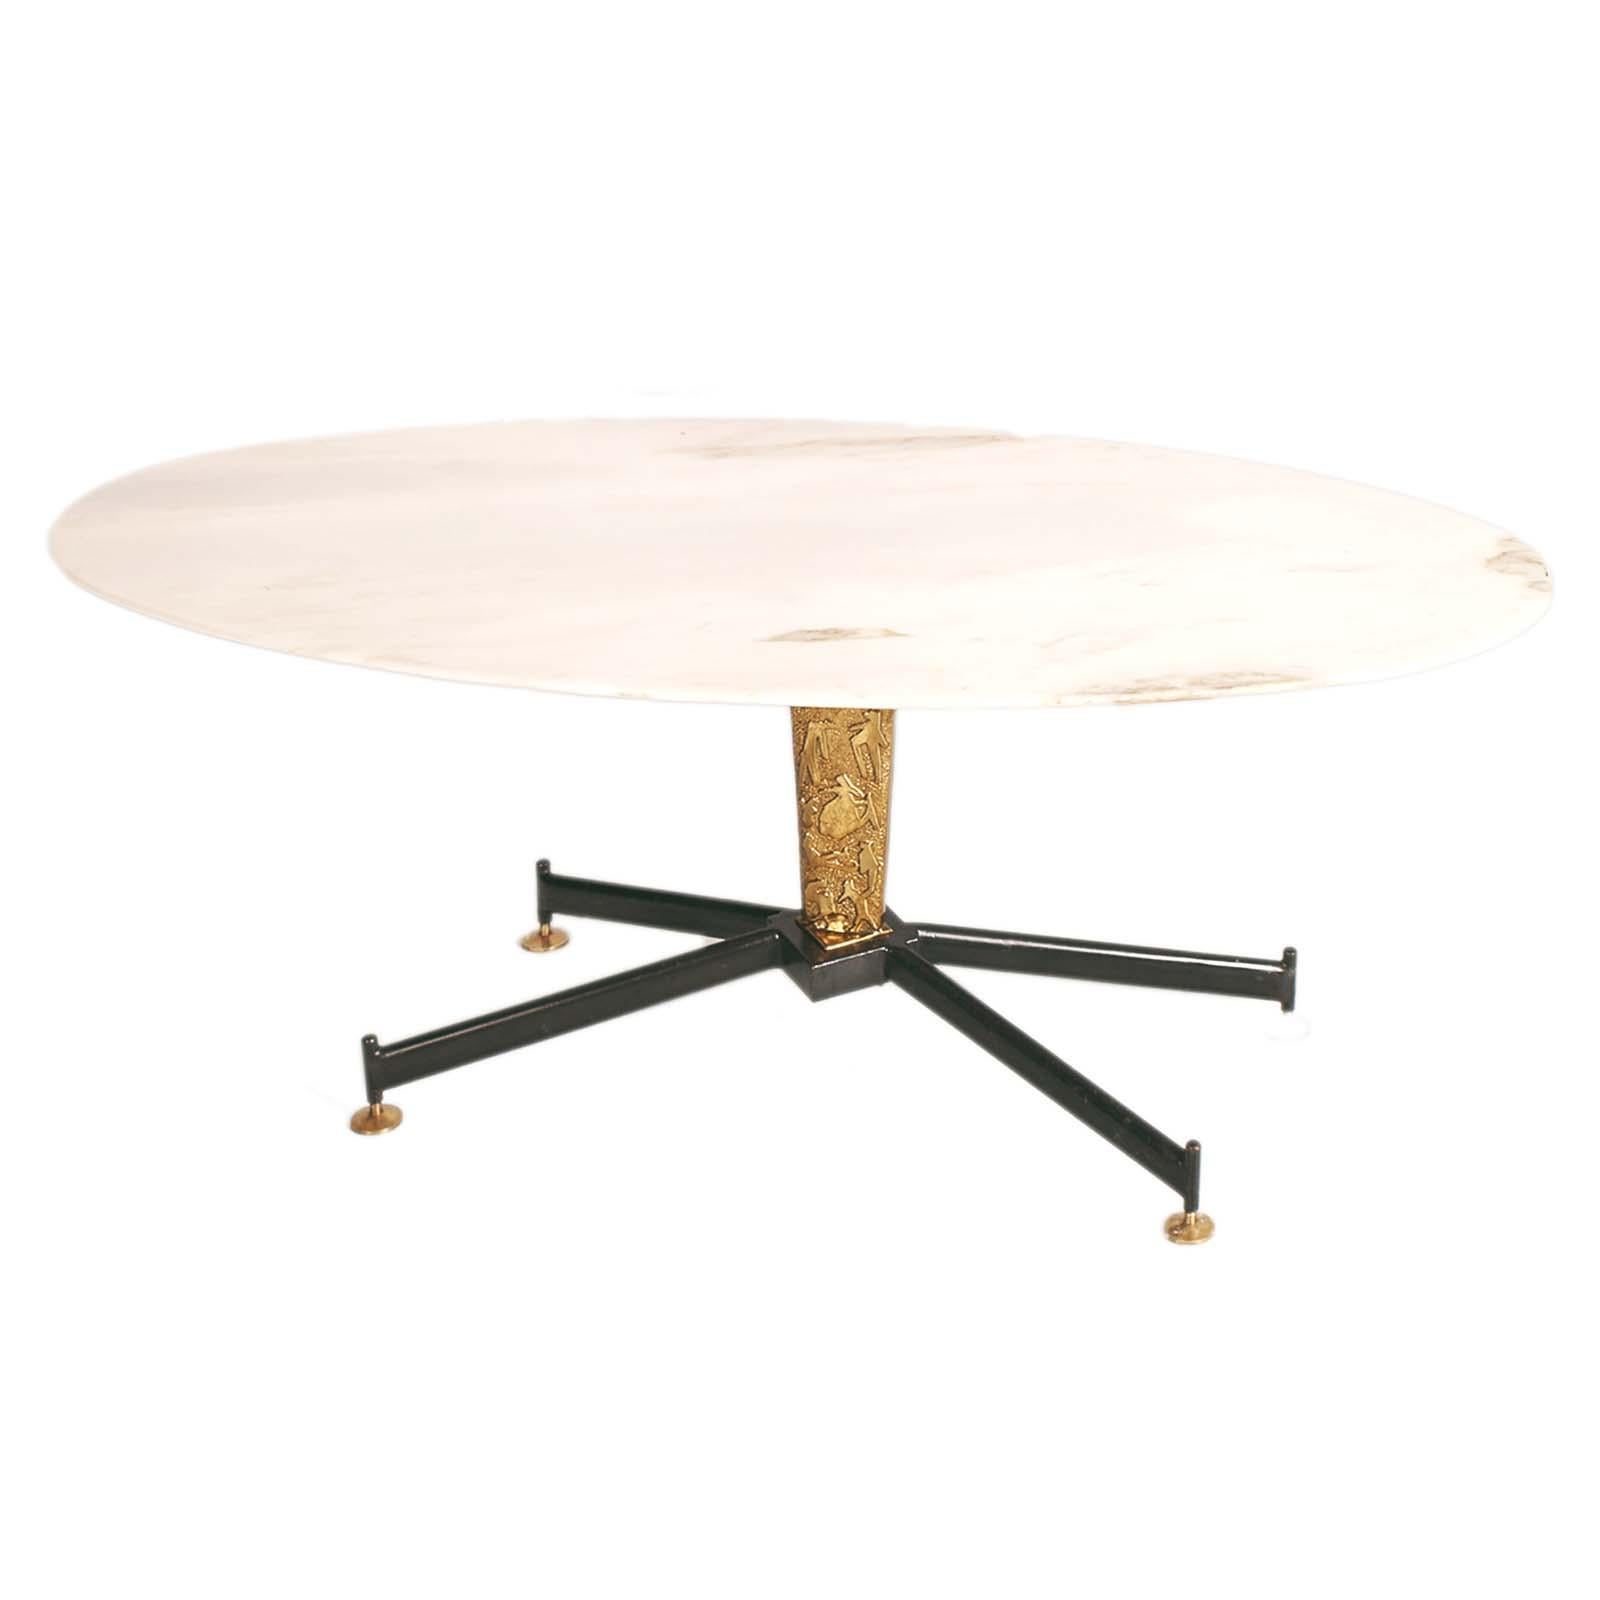 Elegant mid-century coffee table by Permanente Mobili di Cantù with oval top in onyx, cast brass leg decorated in Pop Art Style. Attributed to Carlo de Carli designer.